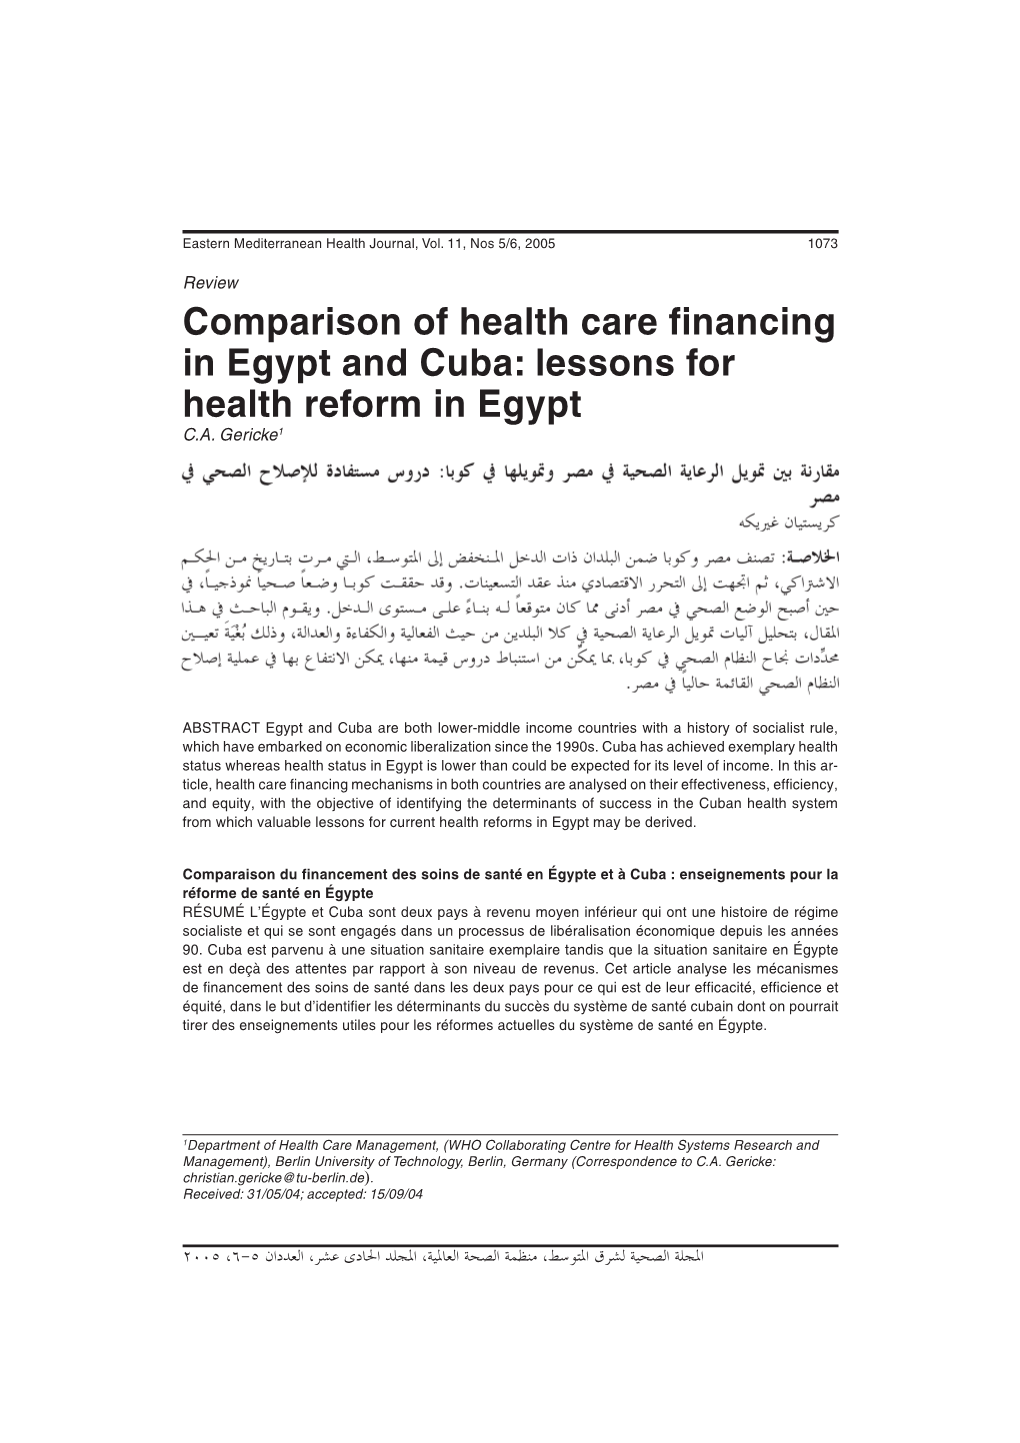 Comparison of Health Care Financing in Egypt and Cuba: Lessons for Health Reform in Egypt C.A